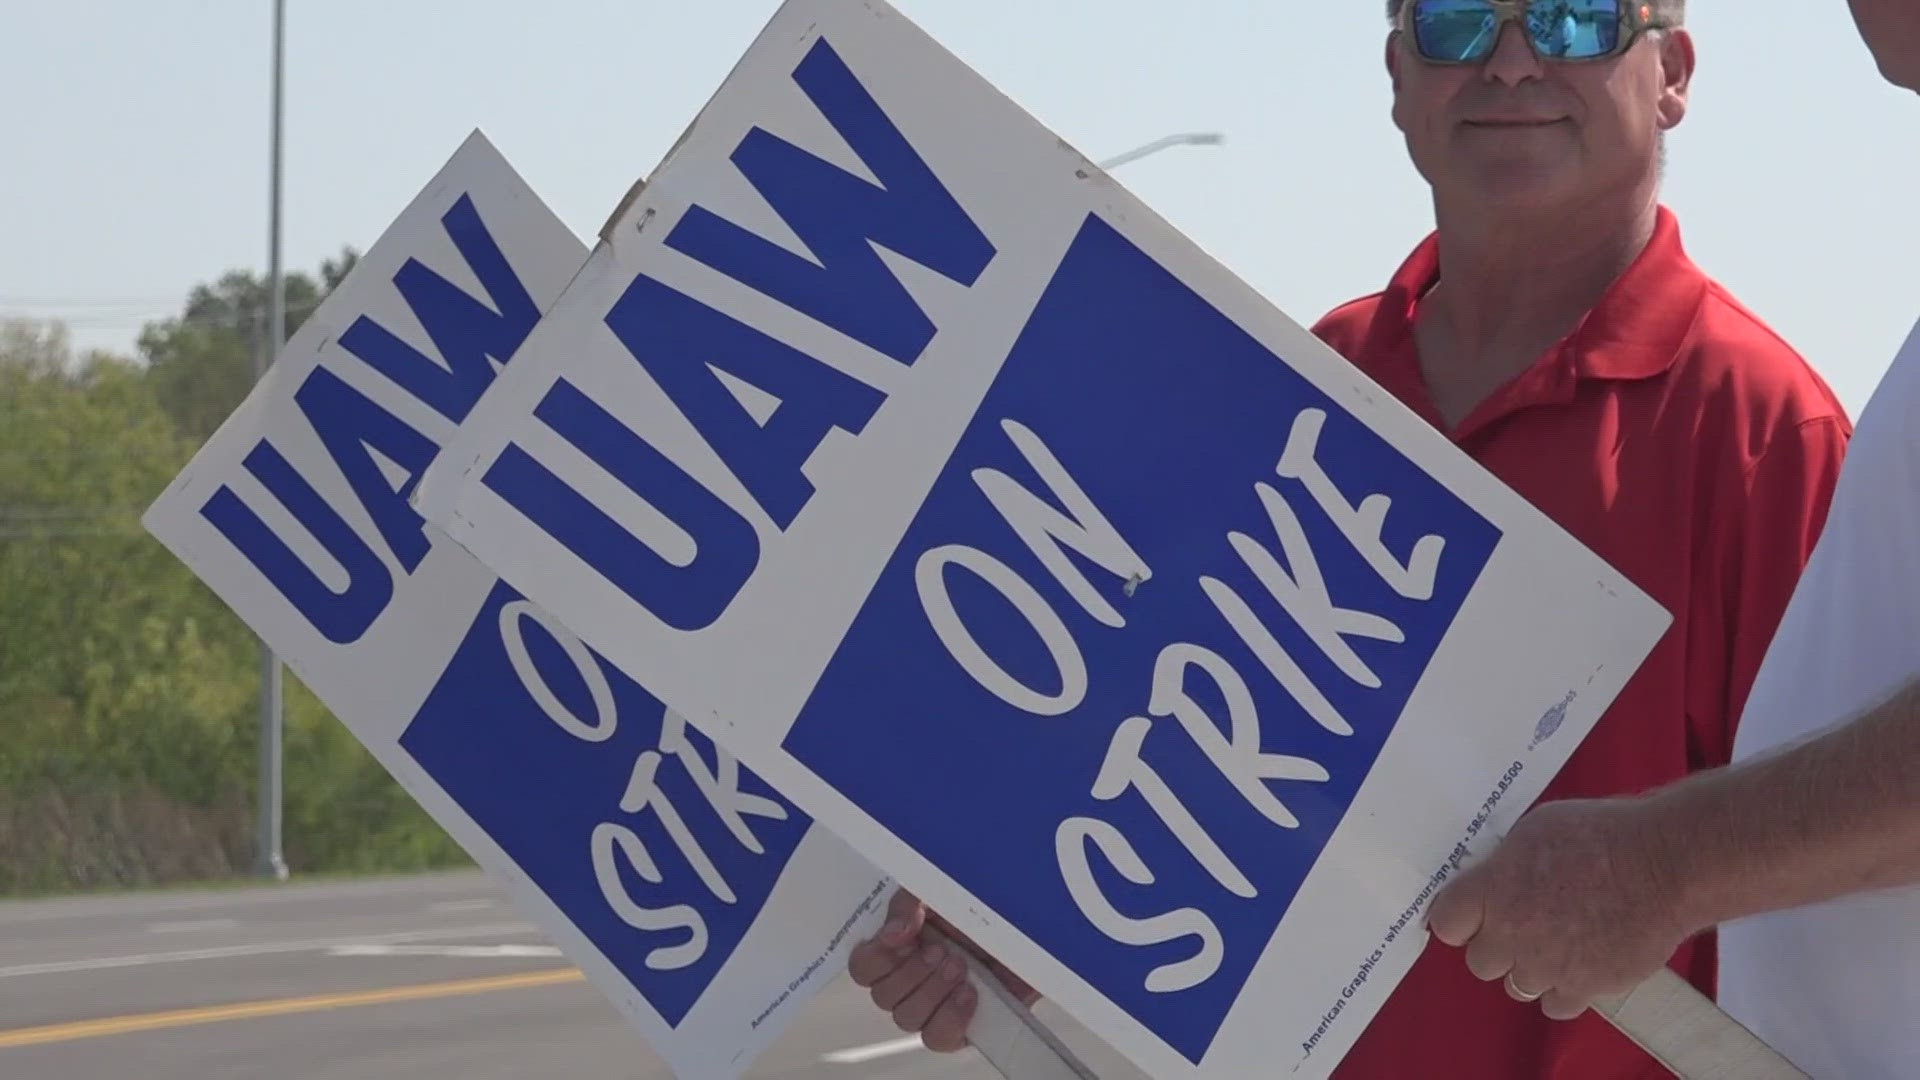 UAW strikers enter its fifth day and have threatened to expand its strike. Workers continue to strike at the Wentzville location.